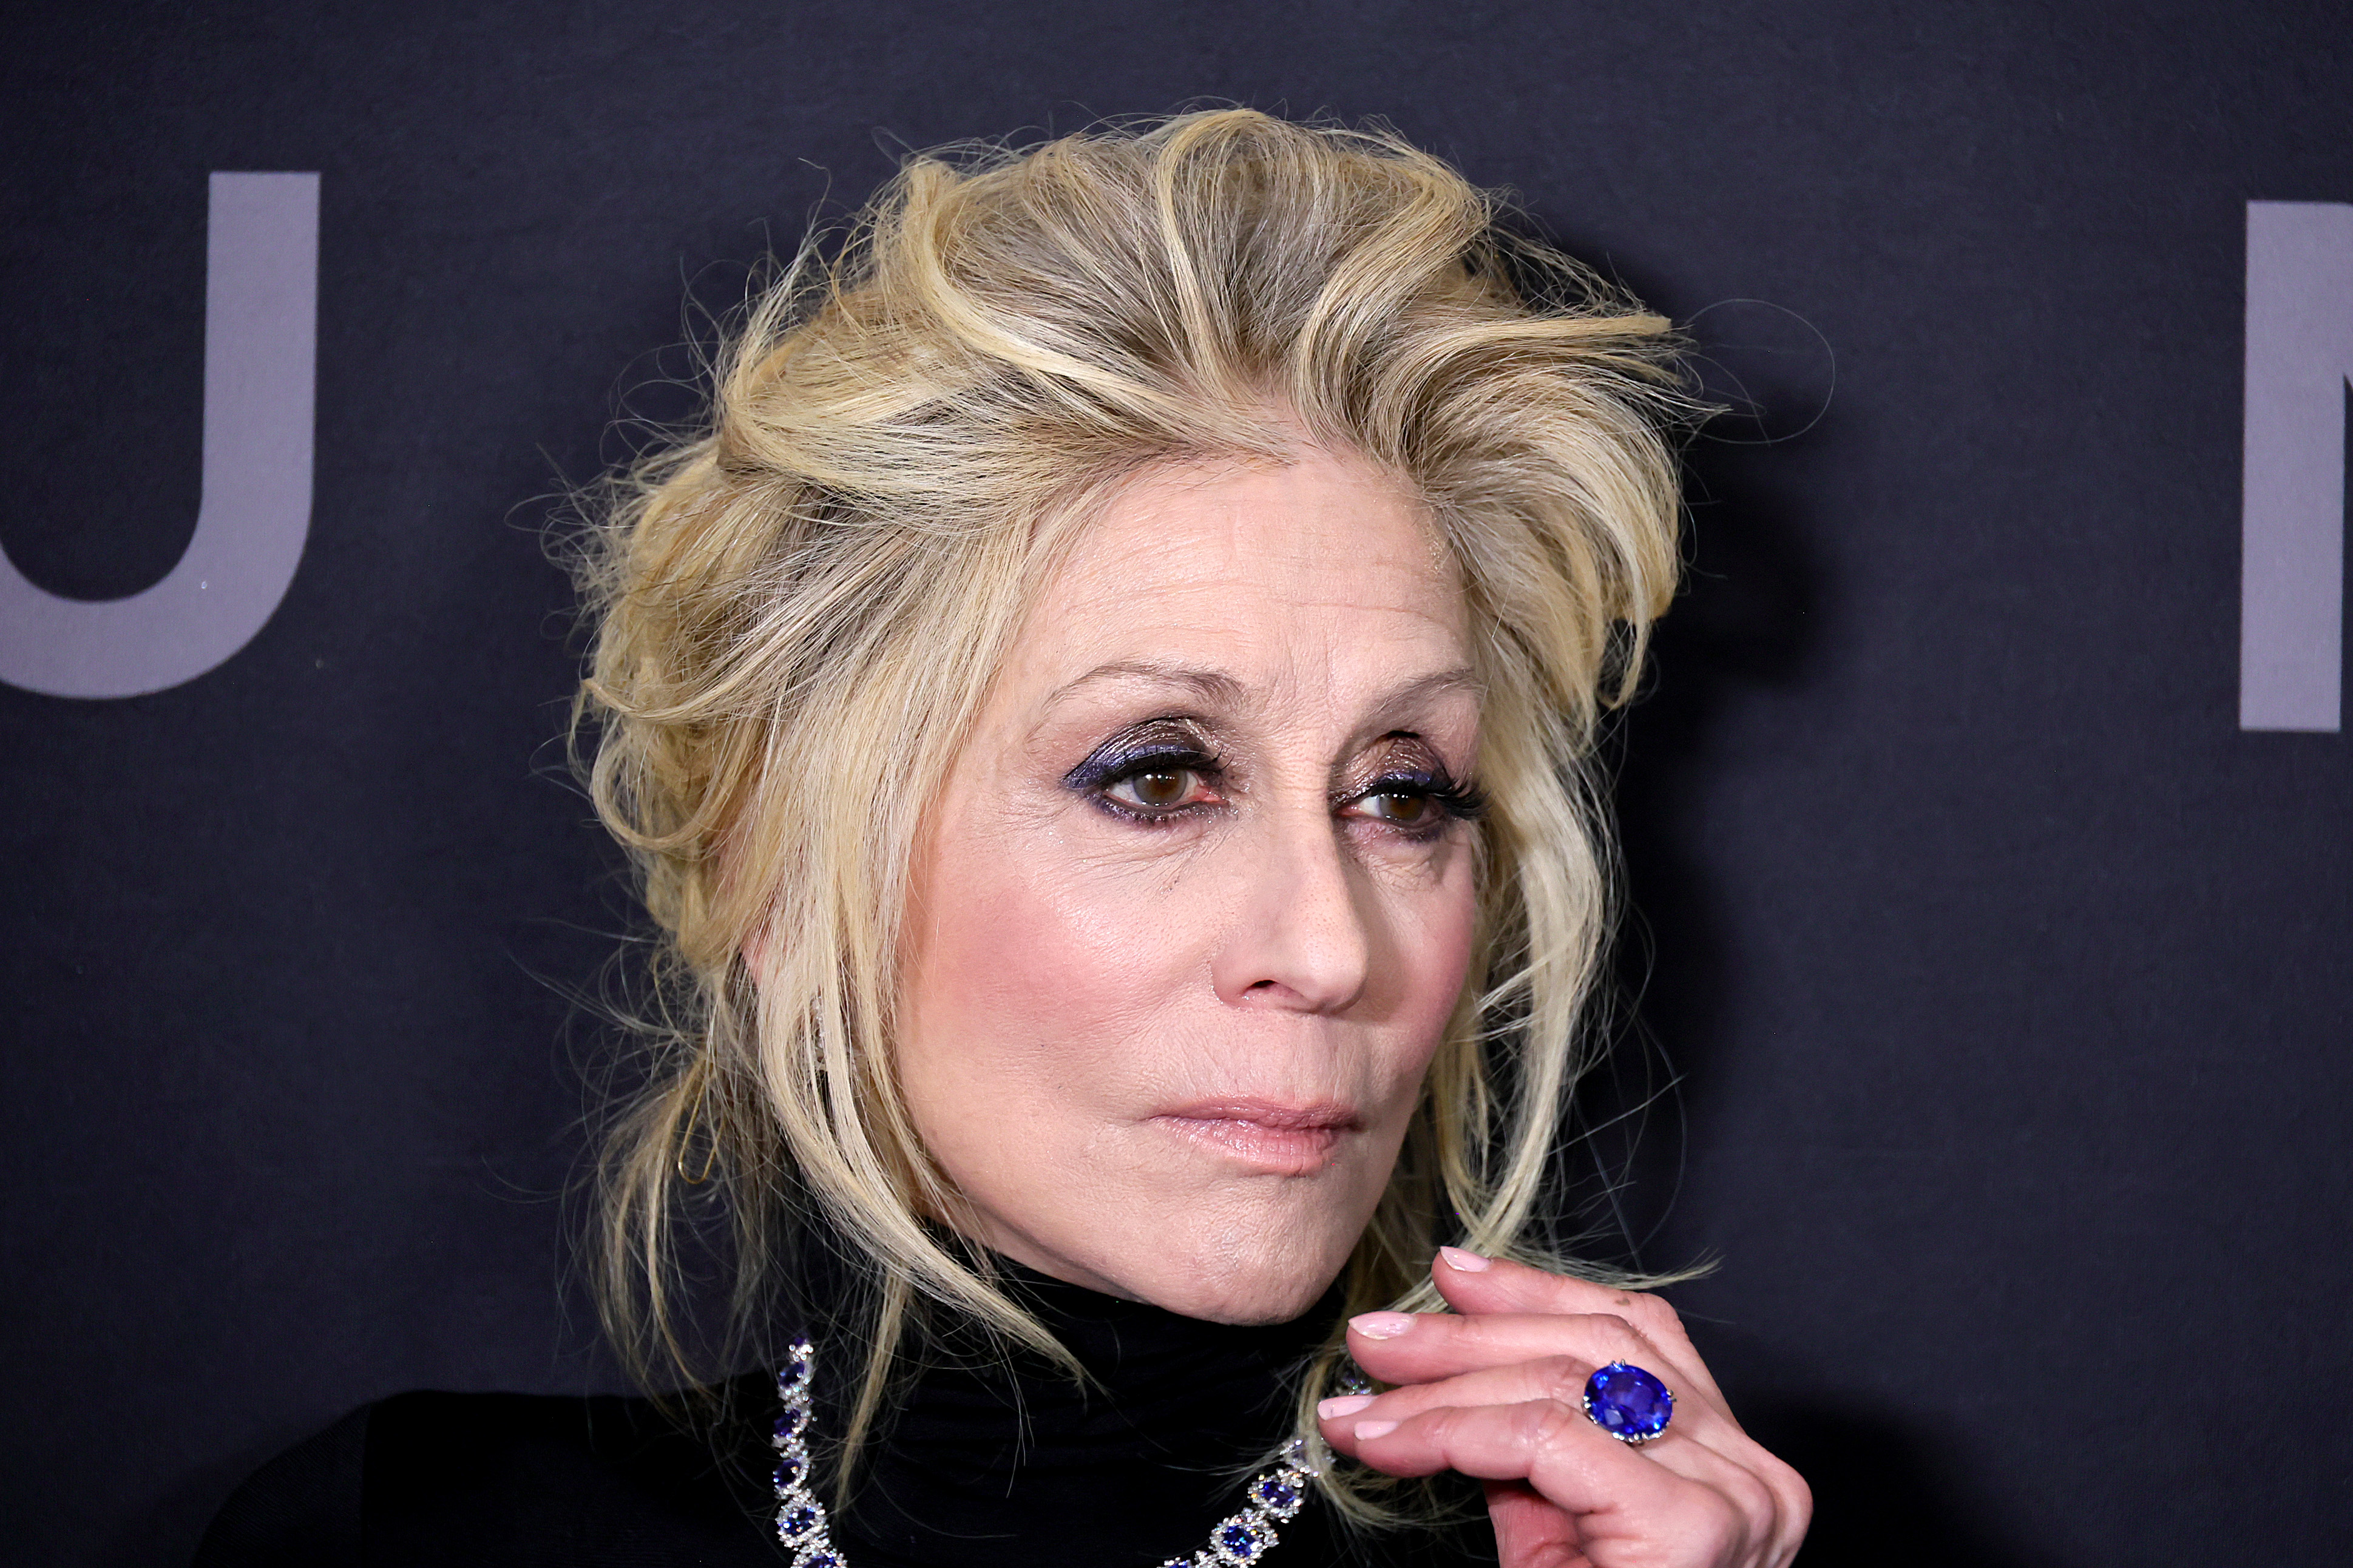 Judith Light at the premiere of "The Menu" in New York in 2022 | Source: Getty Images